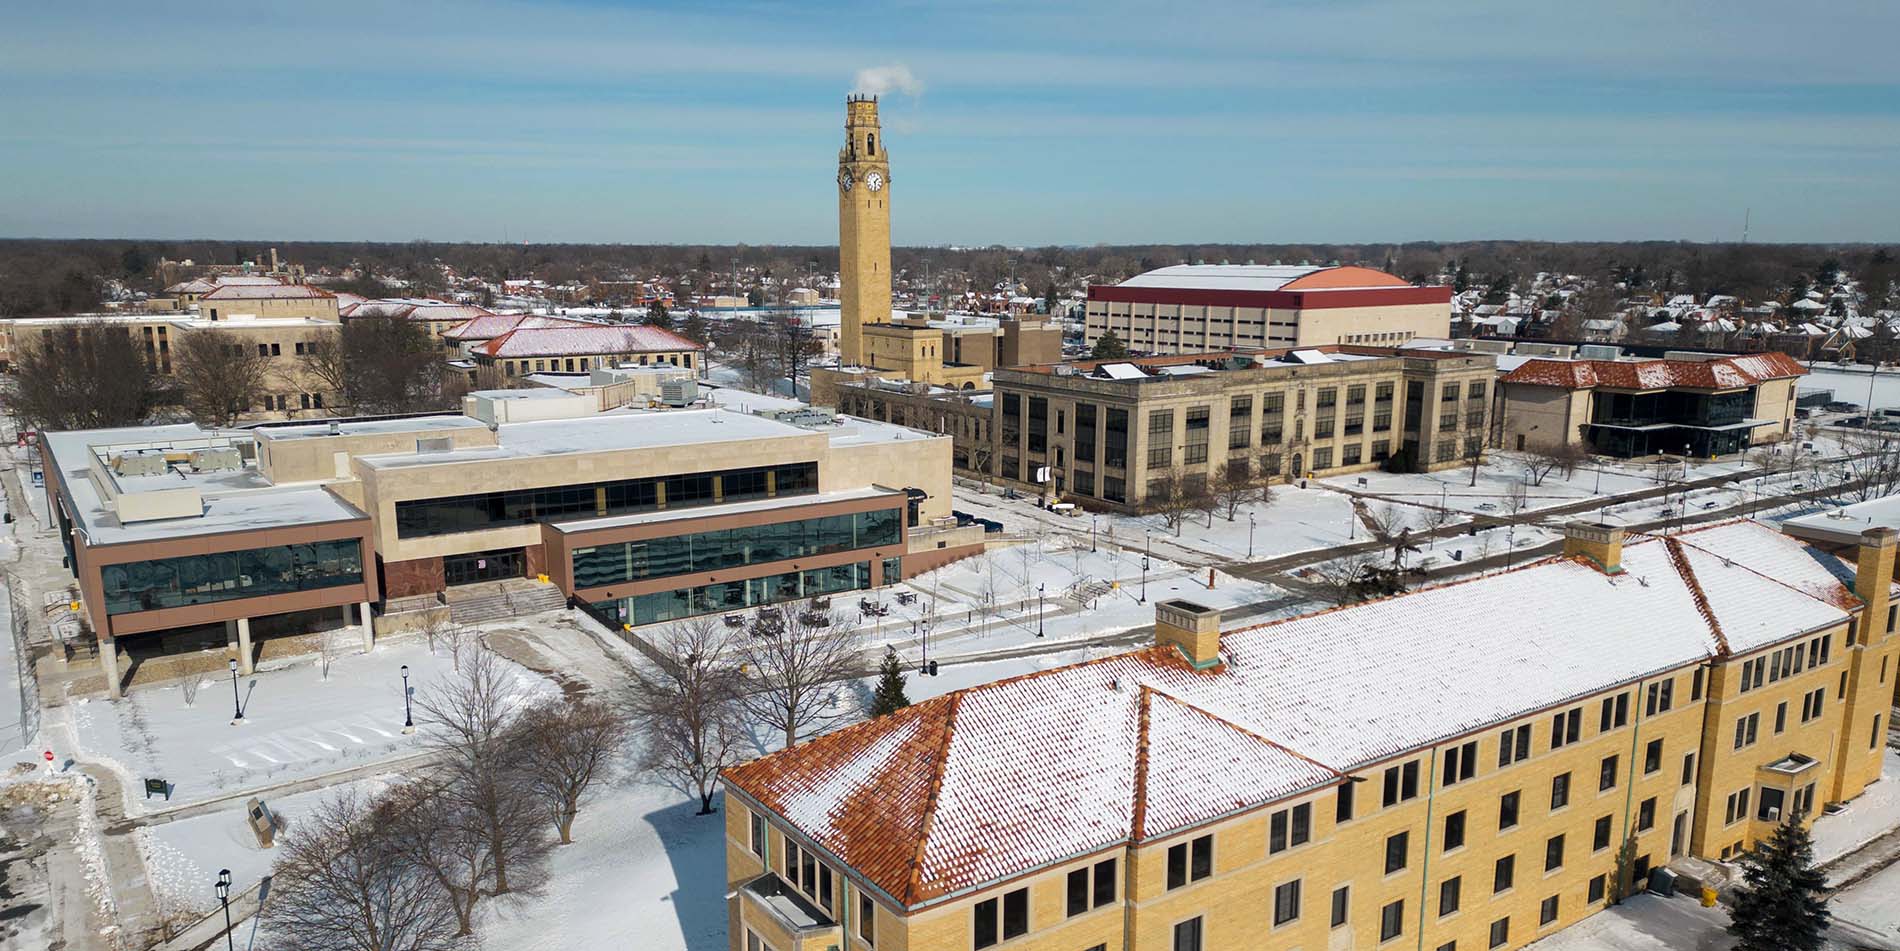 The McNichols Campus is covered in snow during the winter as seen through this aerial drone photo.